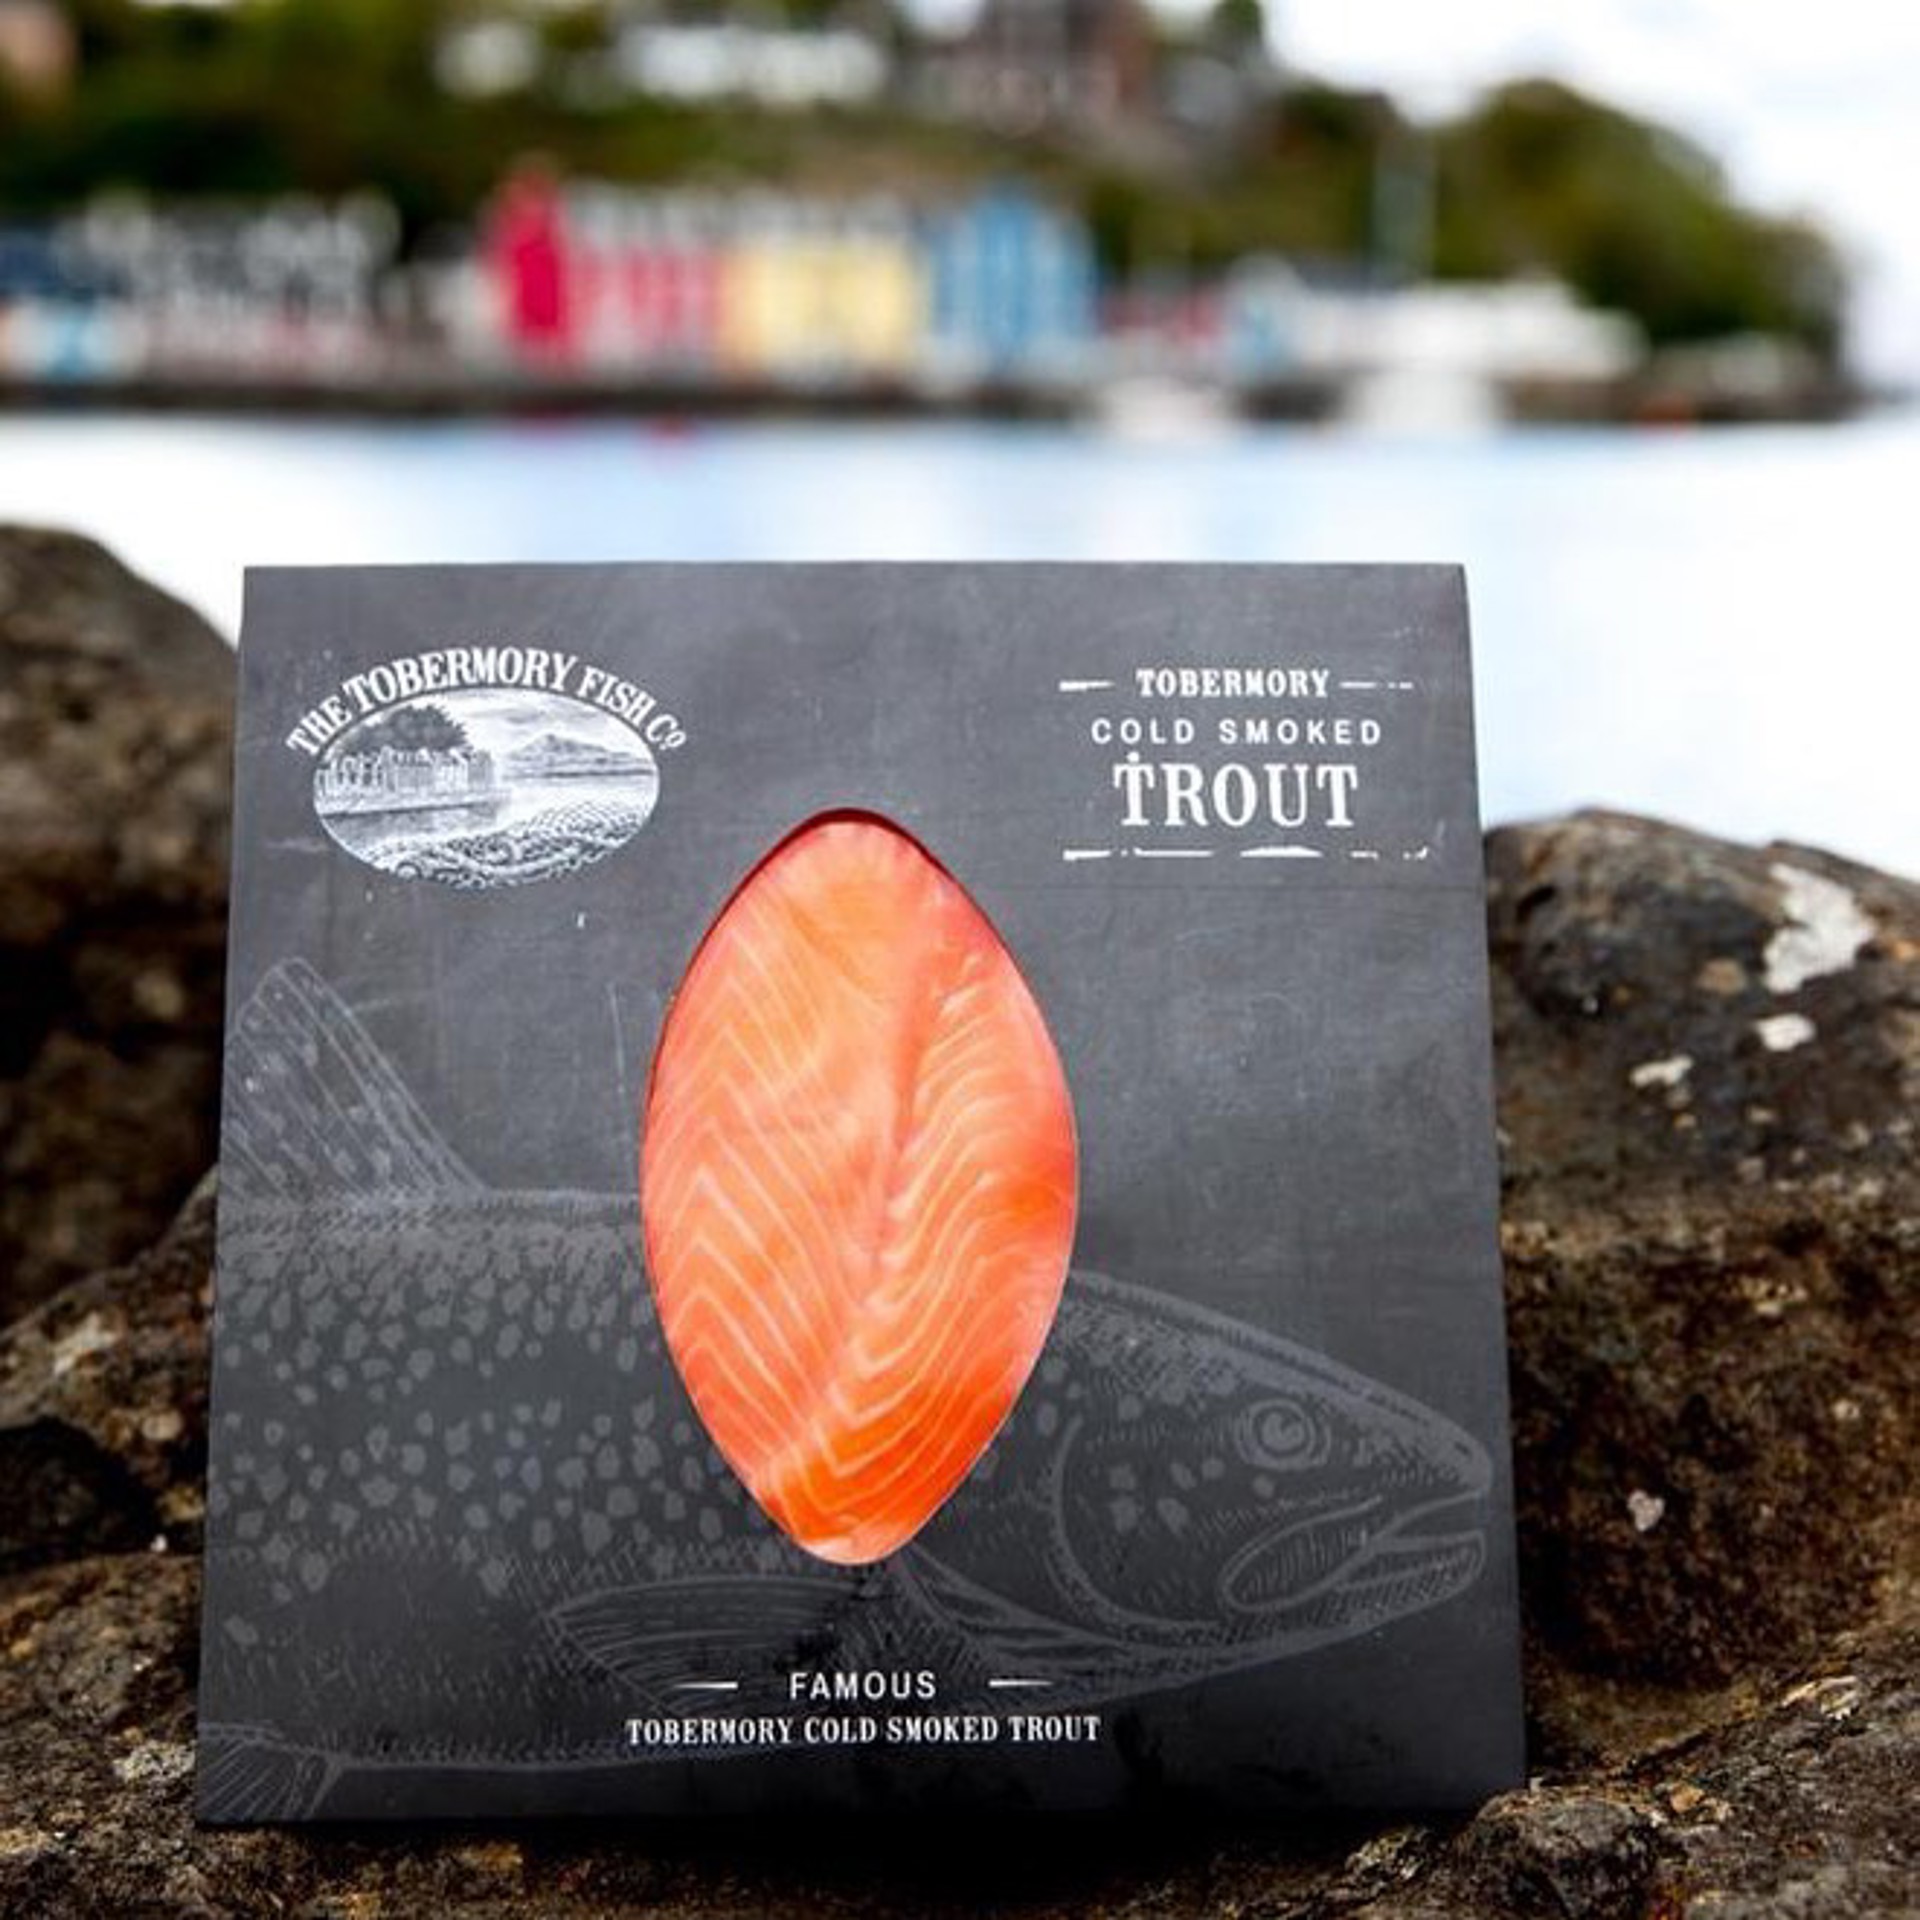 Background image - Mull Trout Tob Fish Co